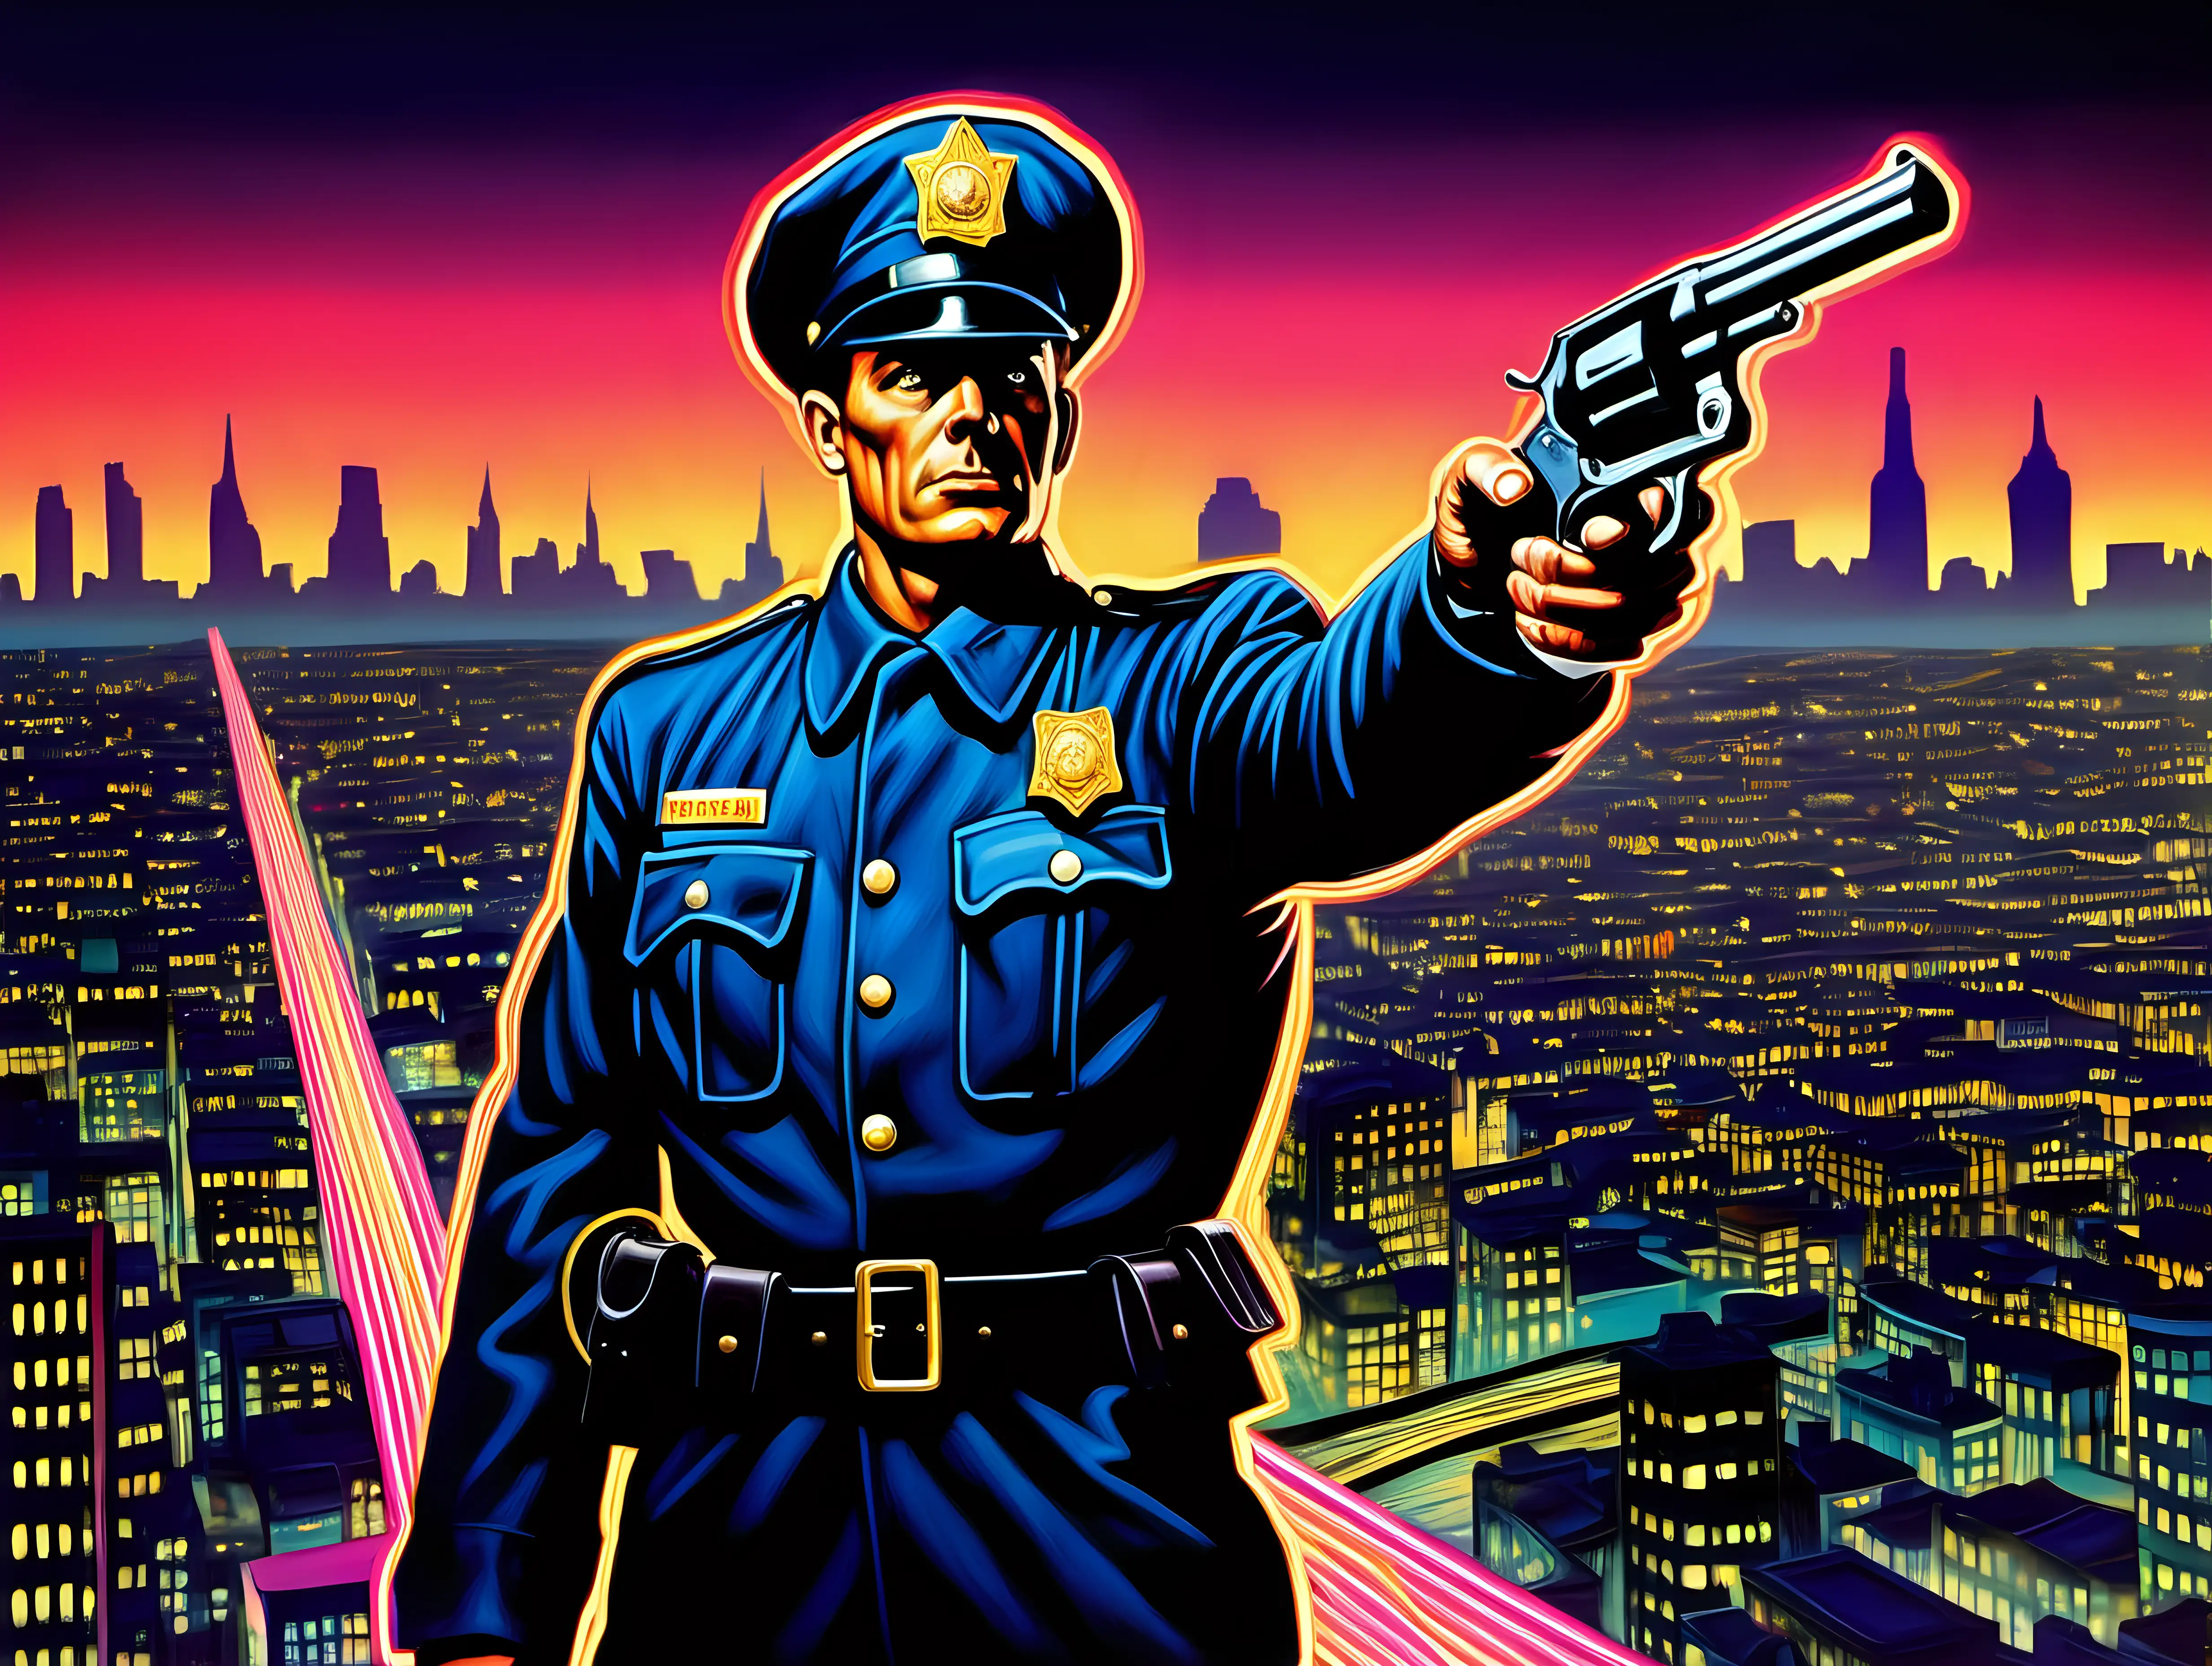 A painting of a 1940's-era policeman from the waist up holding a revolver, standing above a distant neon city at twilight. Light trails, bright neon colors, dramatic lighting, highly realistic, Pop-Art, Art Nouveau.